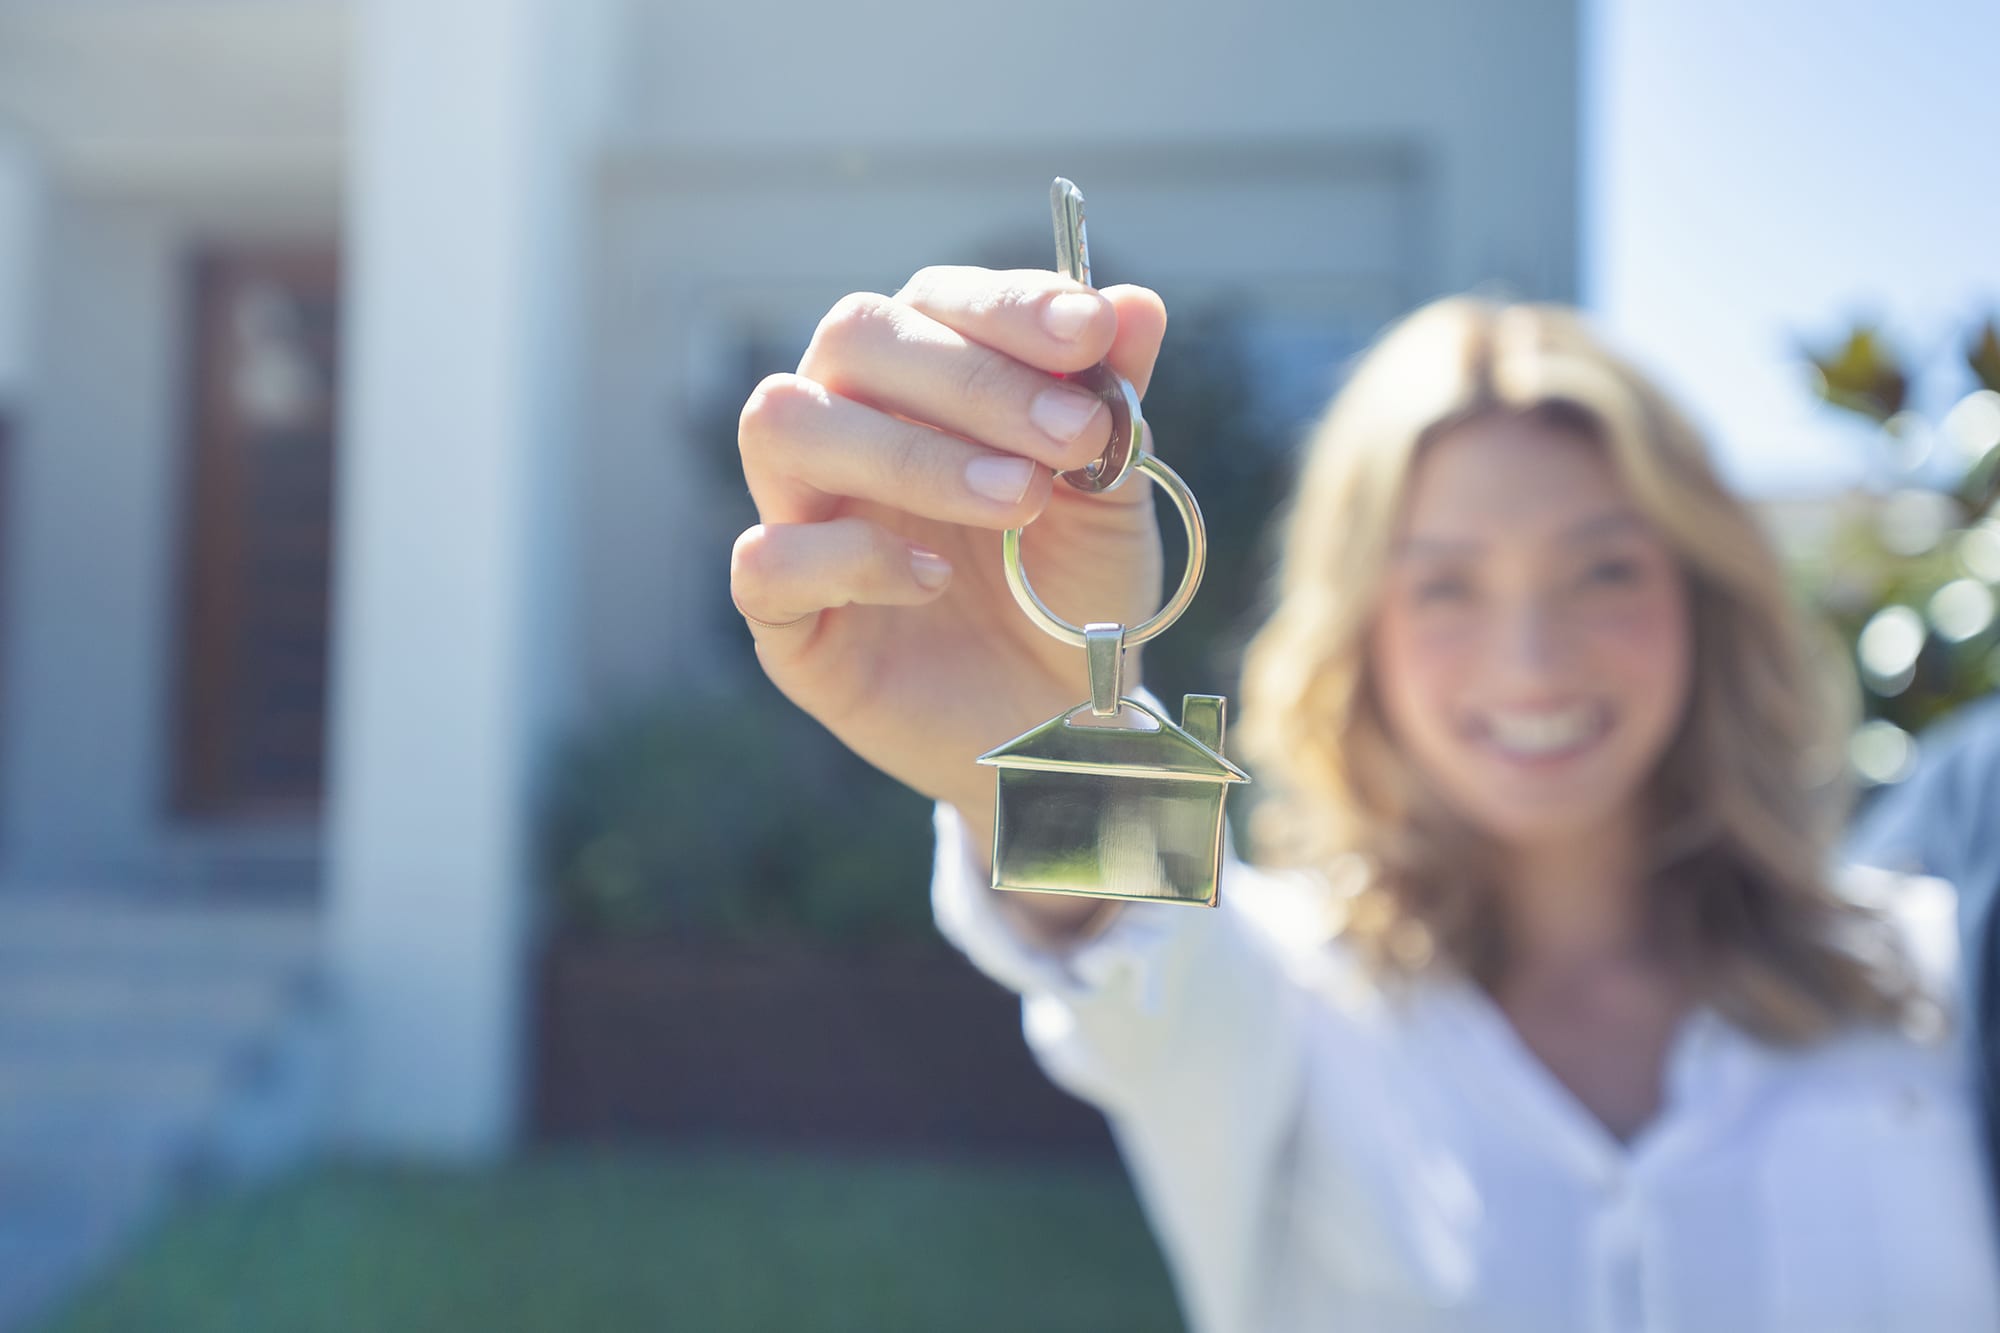 In this article, we’ll take a look at the differences between Primary Mortgage Market vs. Secondary Mortgage Market.